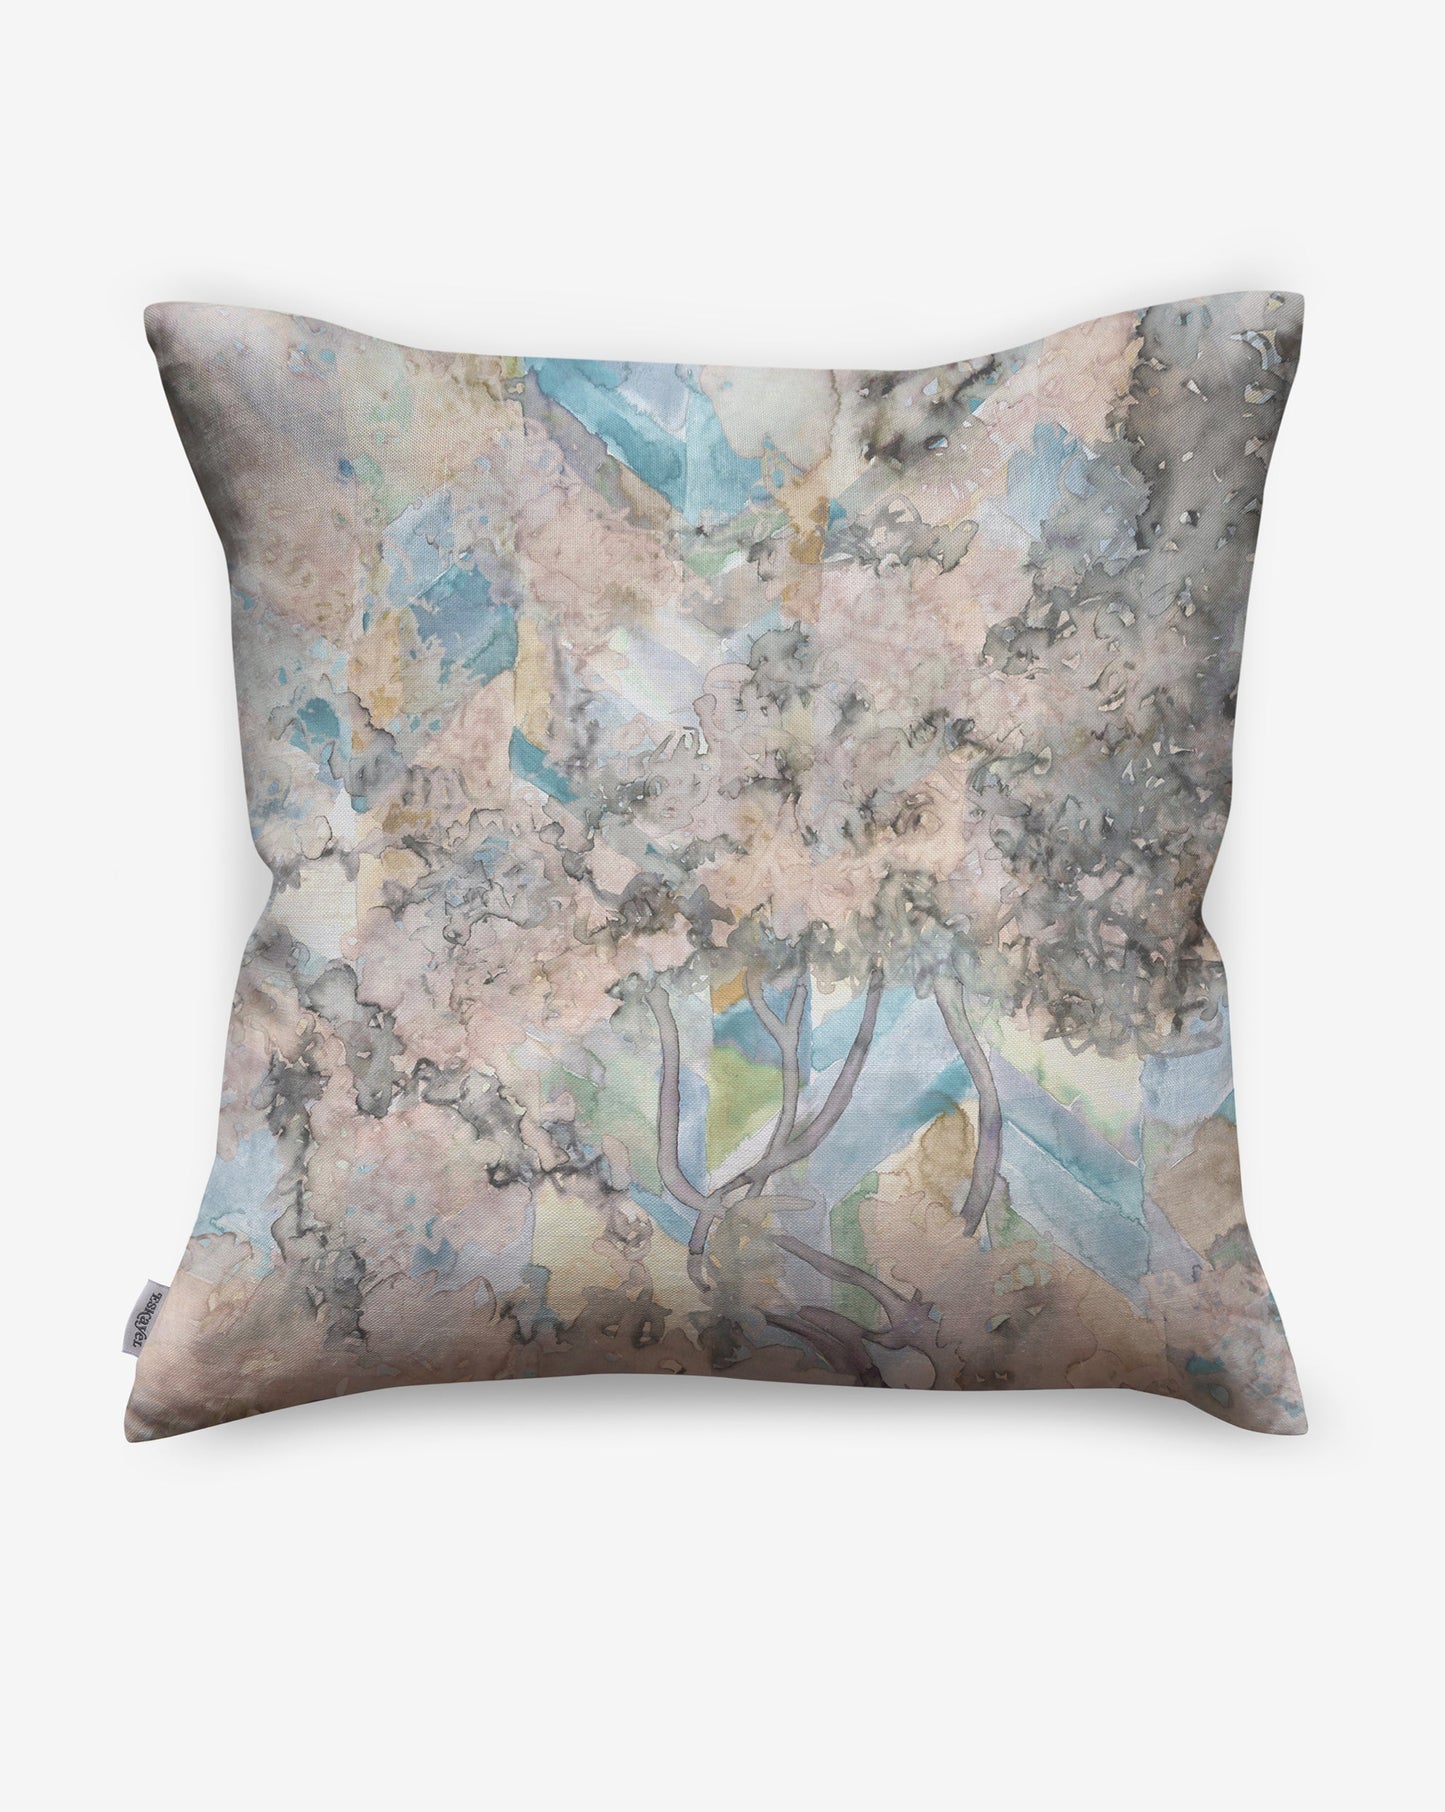 Featuring a floral study on chevrons, Inflorescence pillows in our Sage colorway provide a palette of beige, blue and grey. 